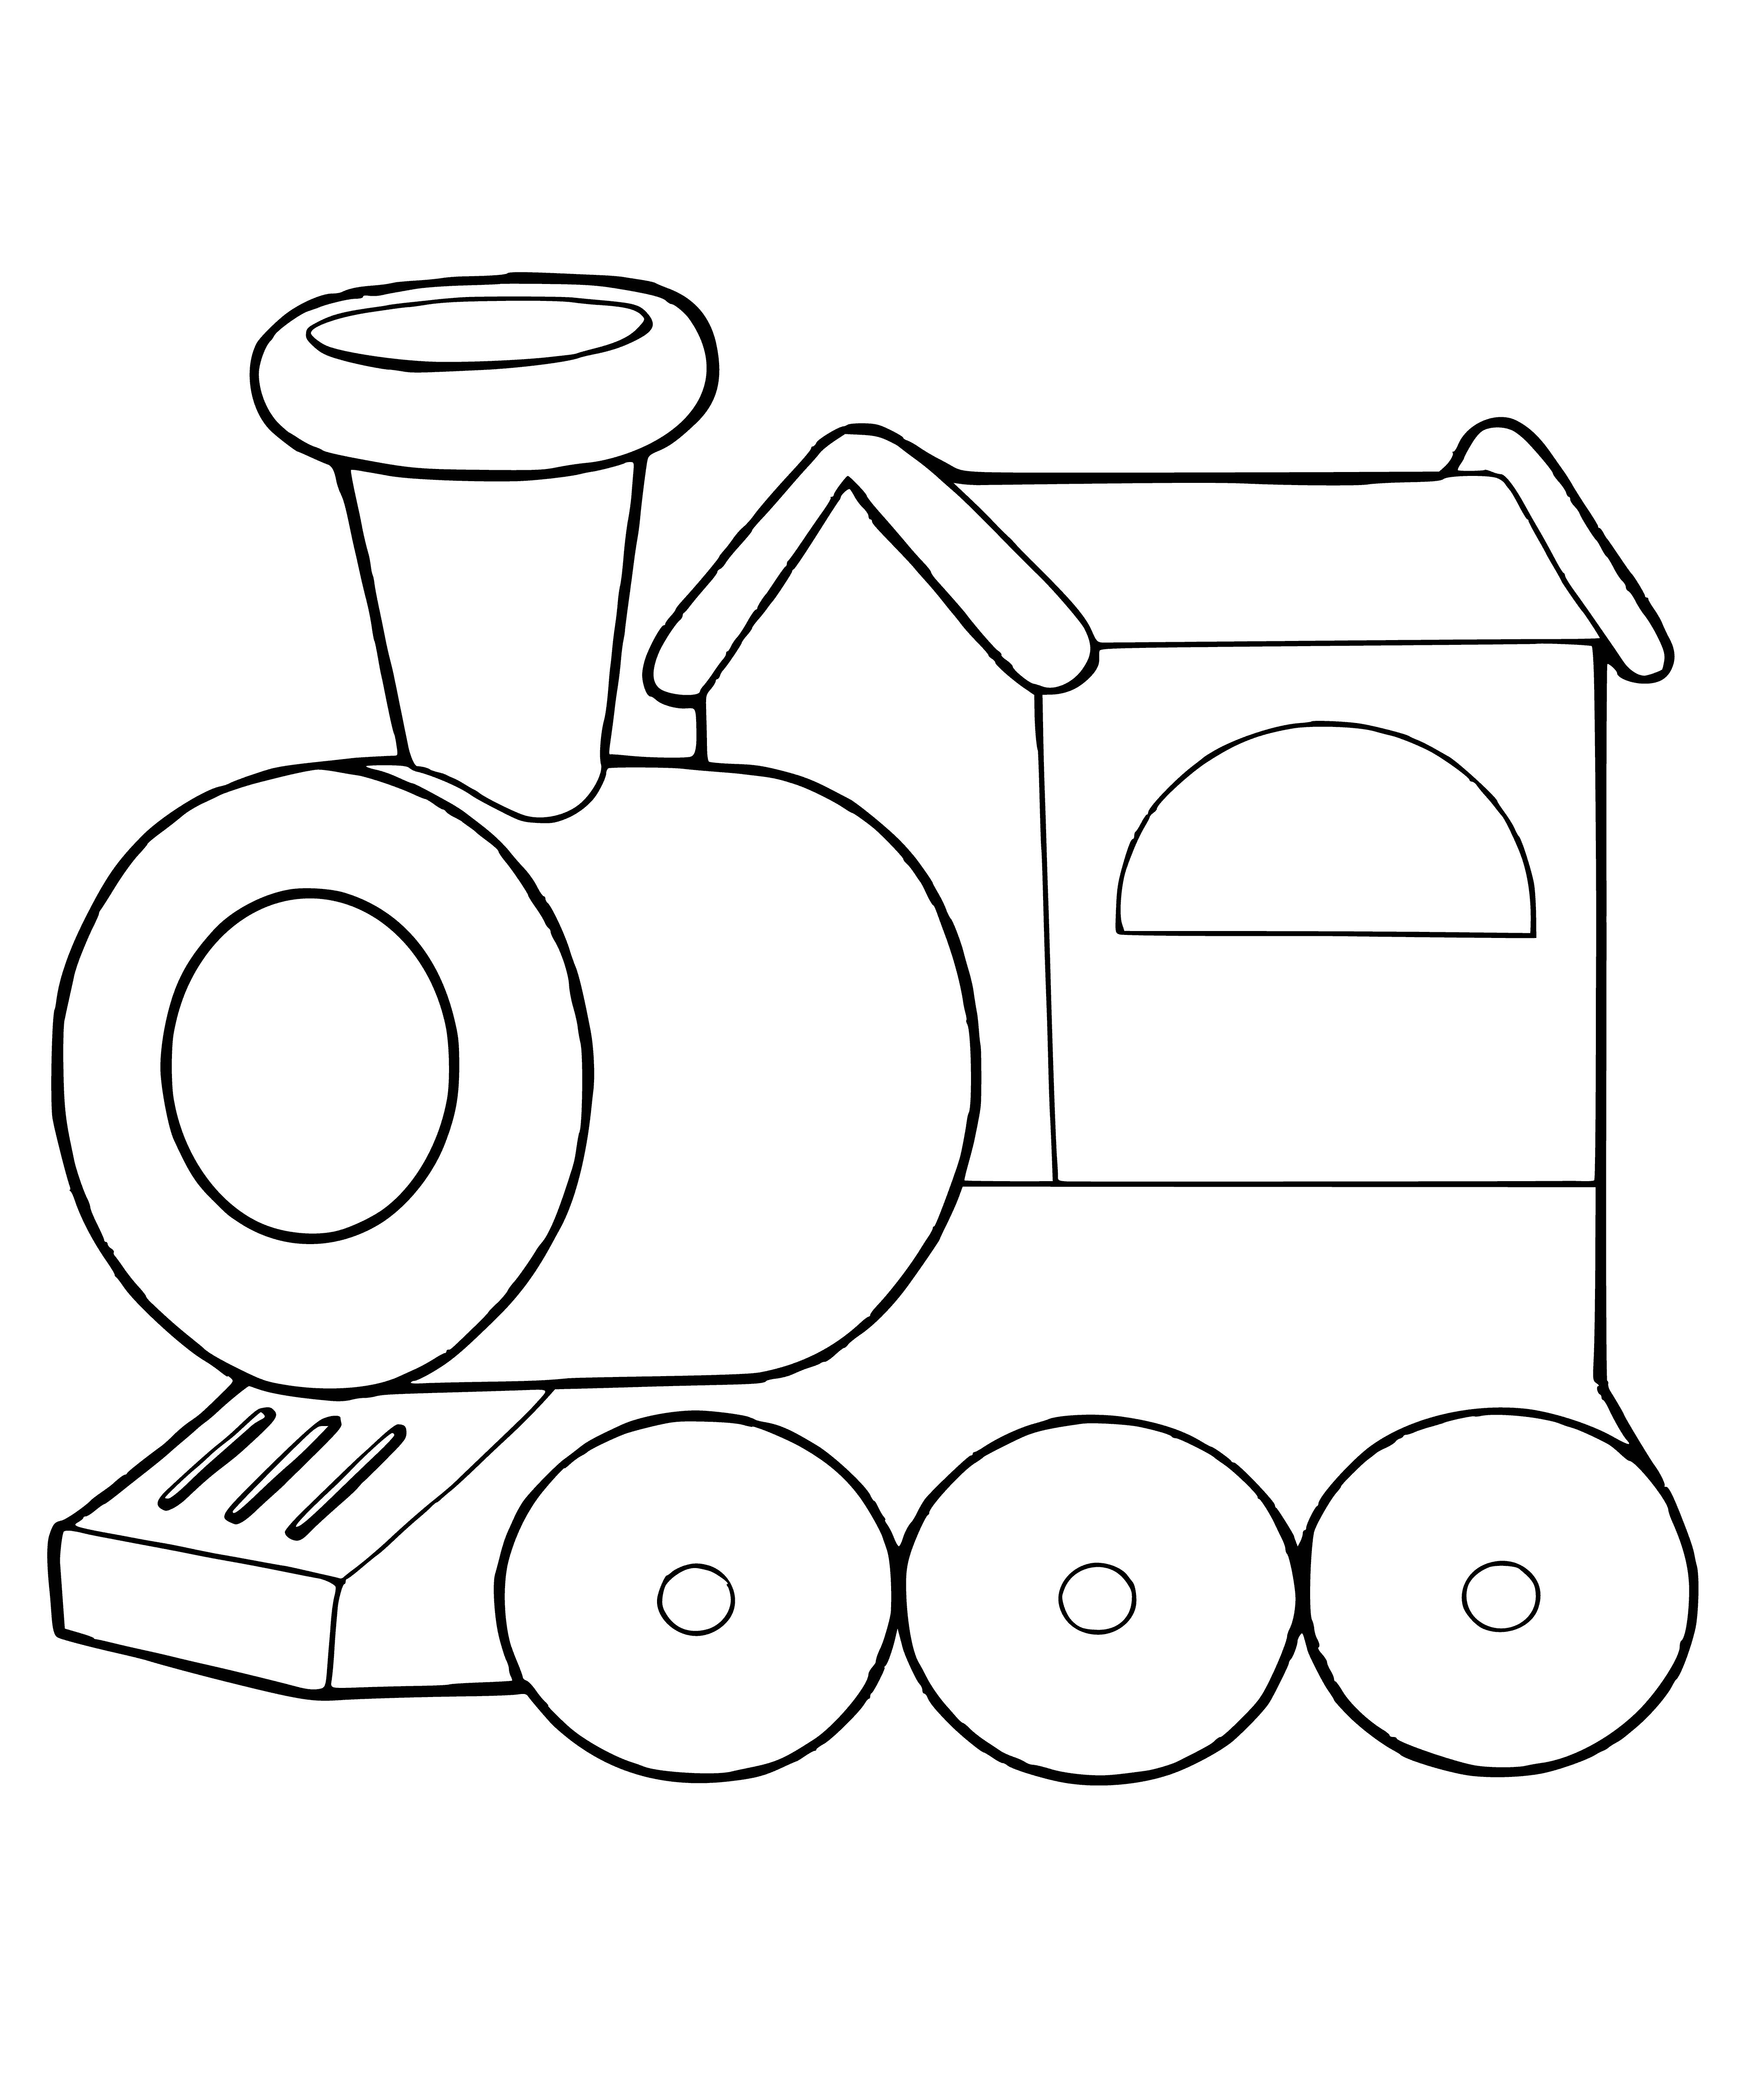 coloring page: Classic brown train with white smokestack and yellow light. "Toys Locomotive" written on the side.